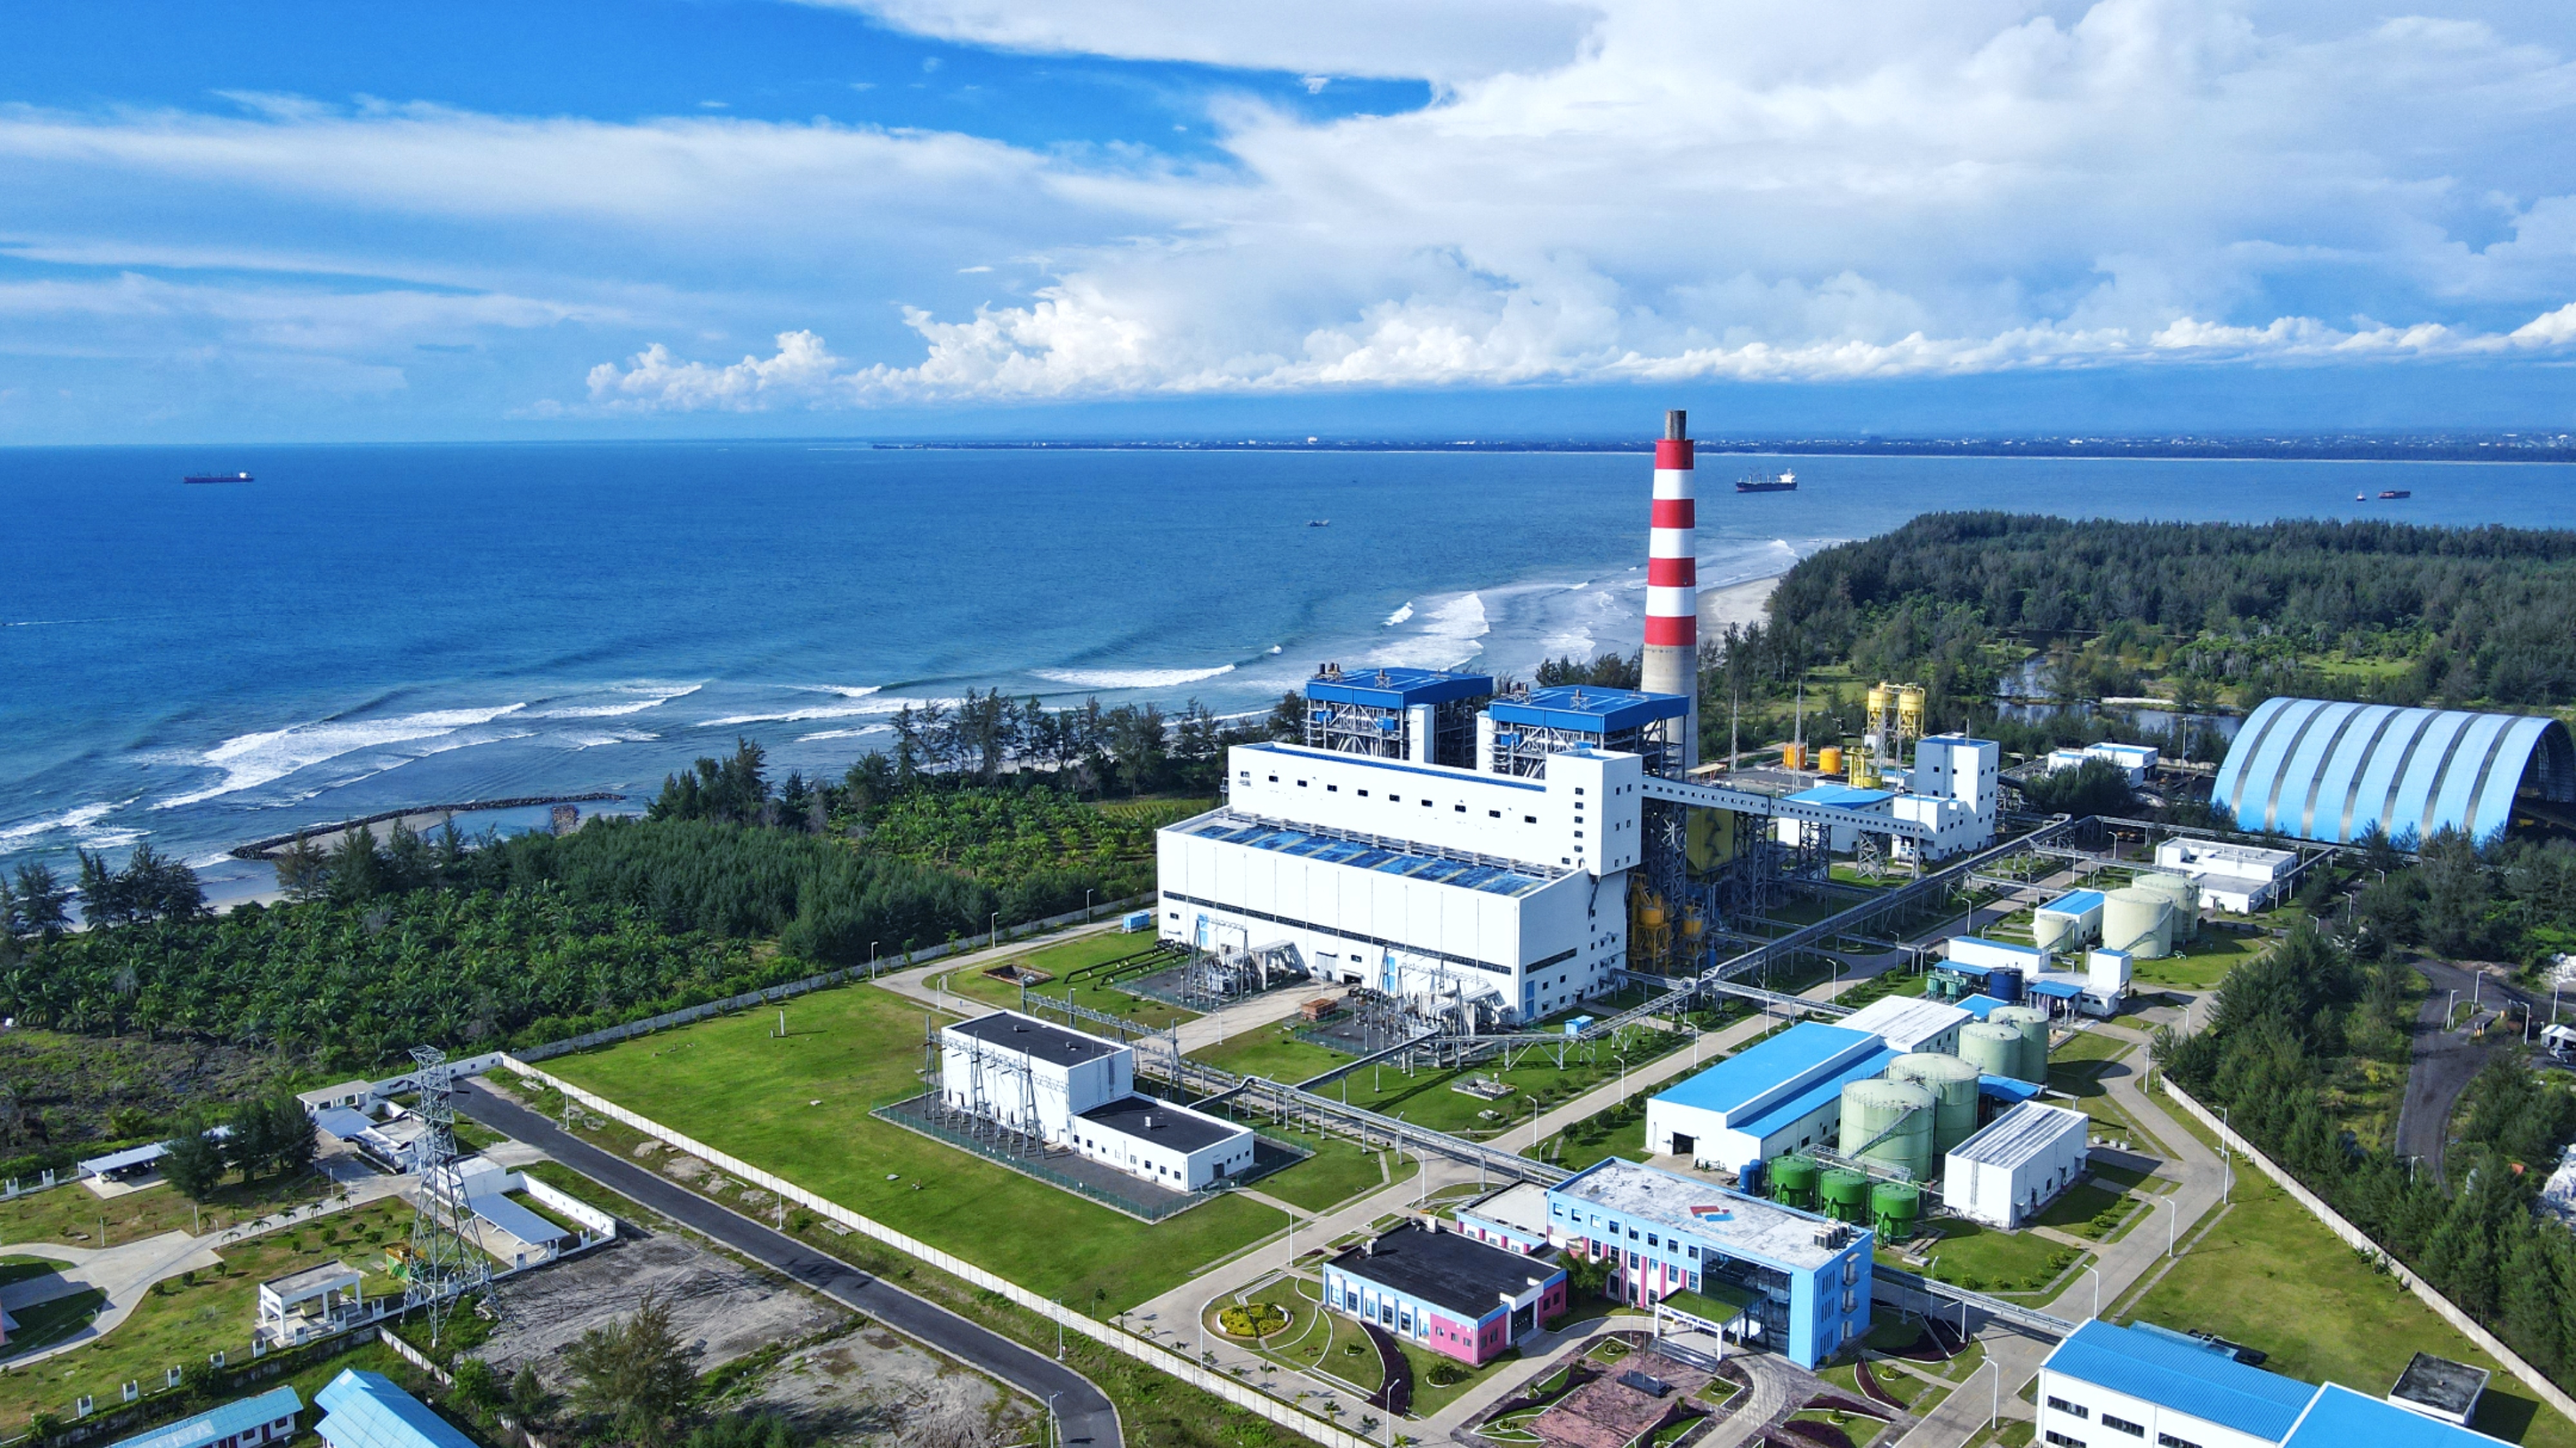 The annual cumulative power generation of the Bengkulu power plant reached a record high